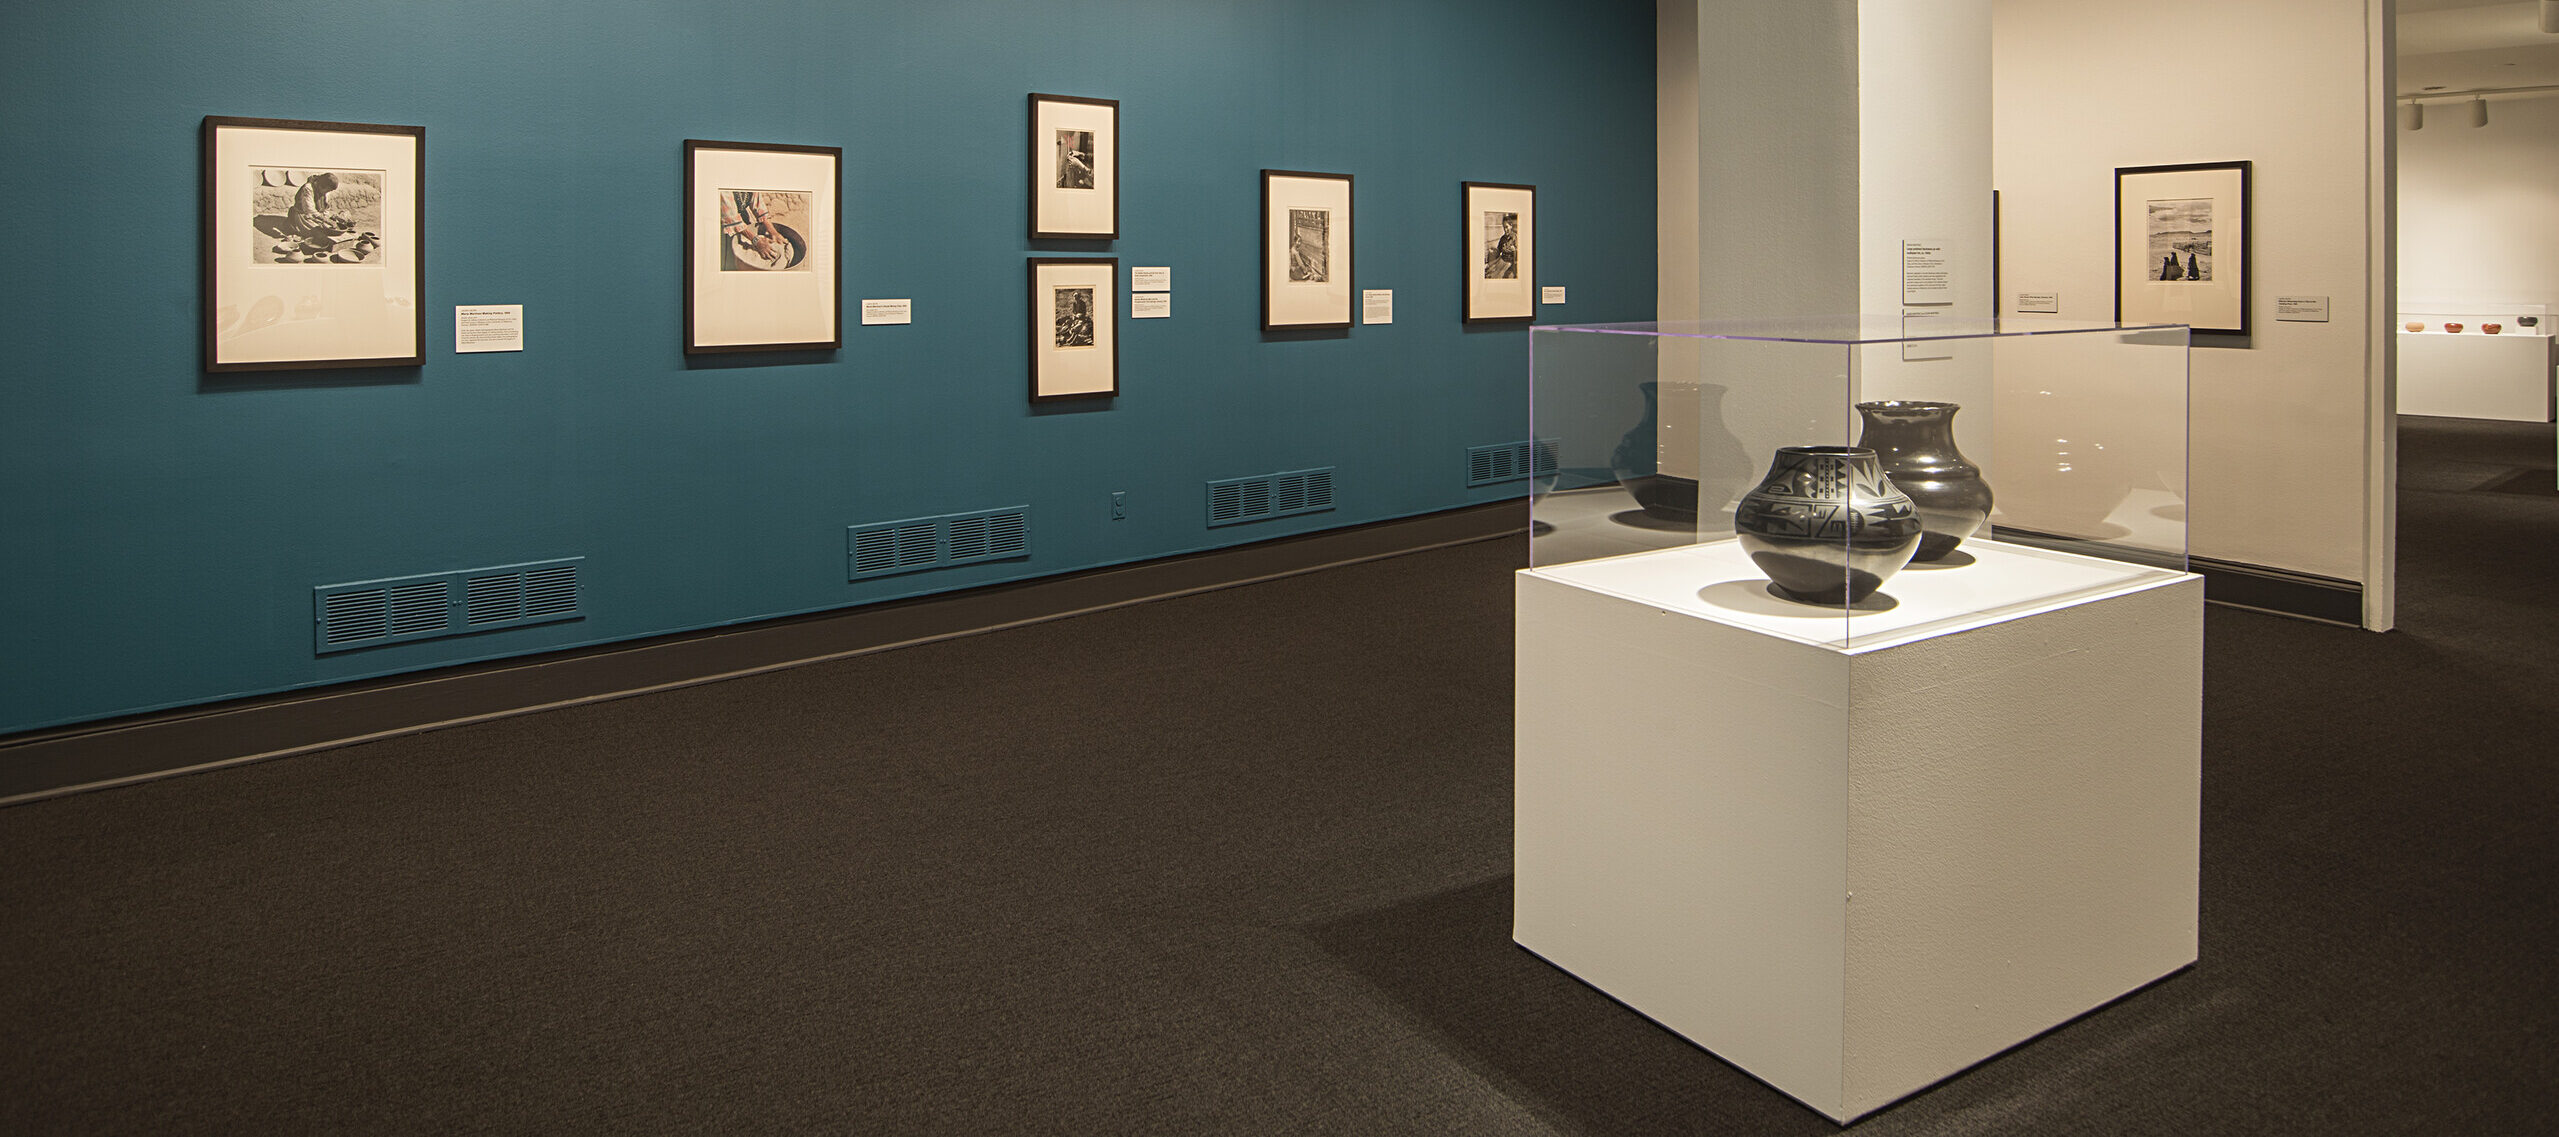 Installation view of a gallery space featuring black and white photographs hanging on a blue wall and black ceramic or clay vessels placed on pedestals in a glass box.